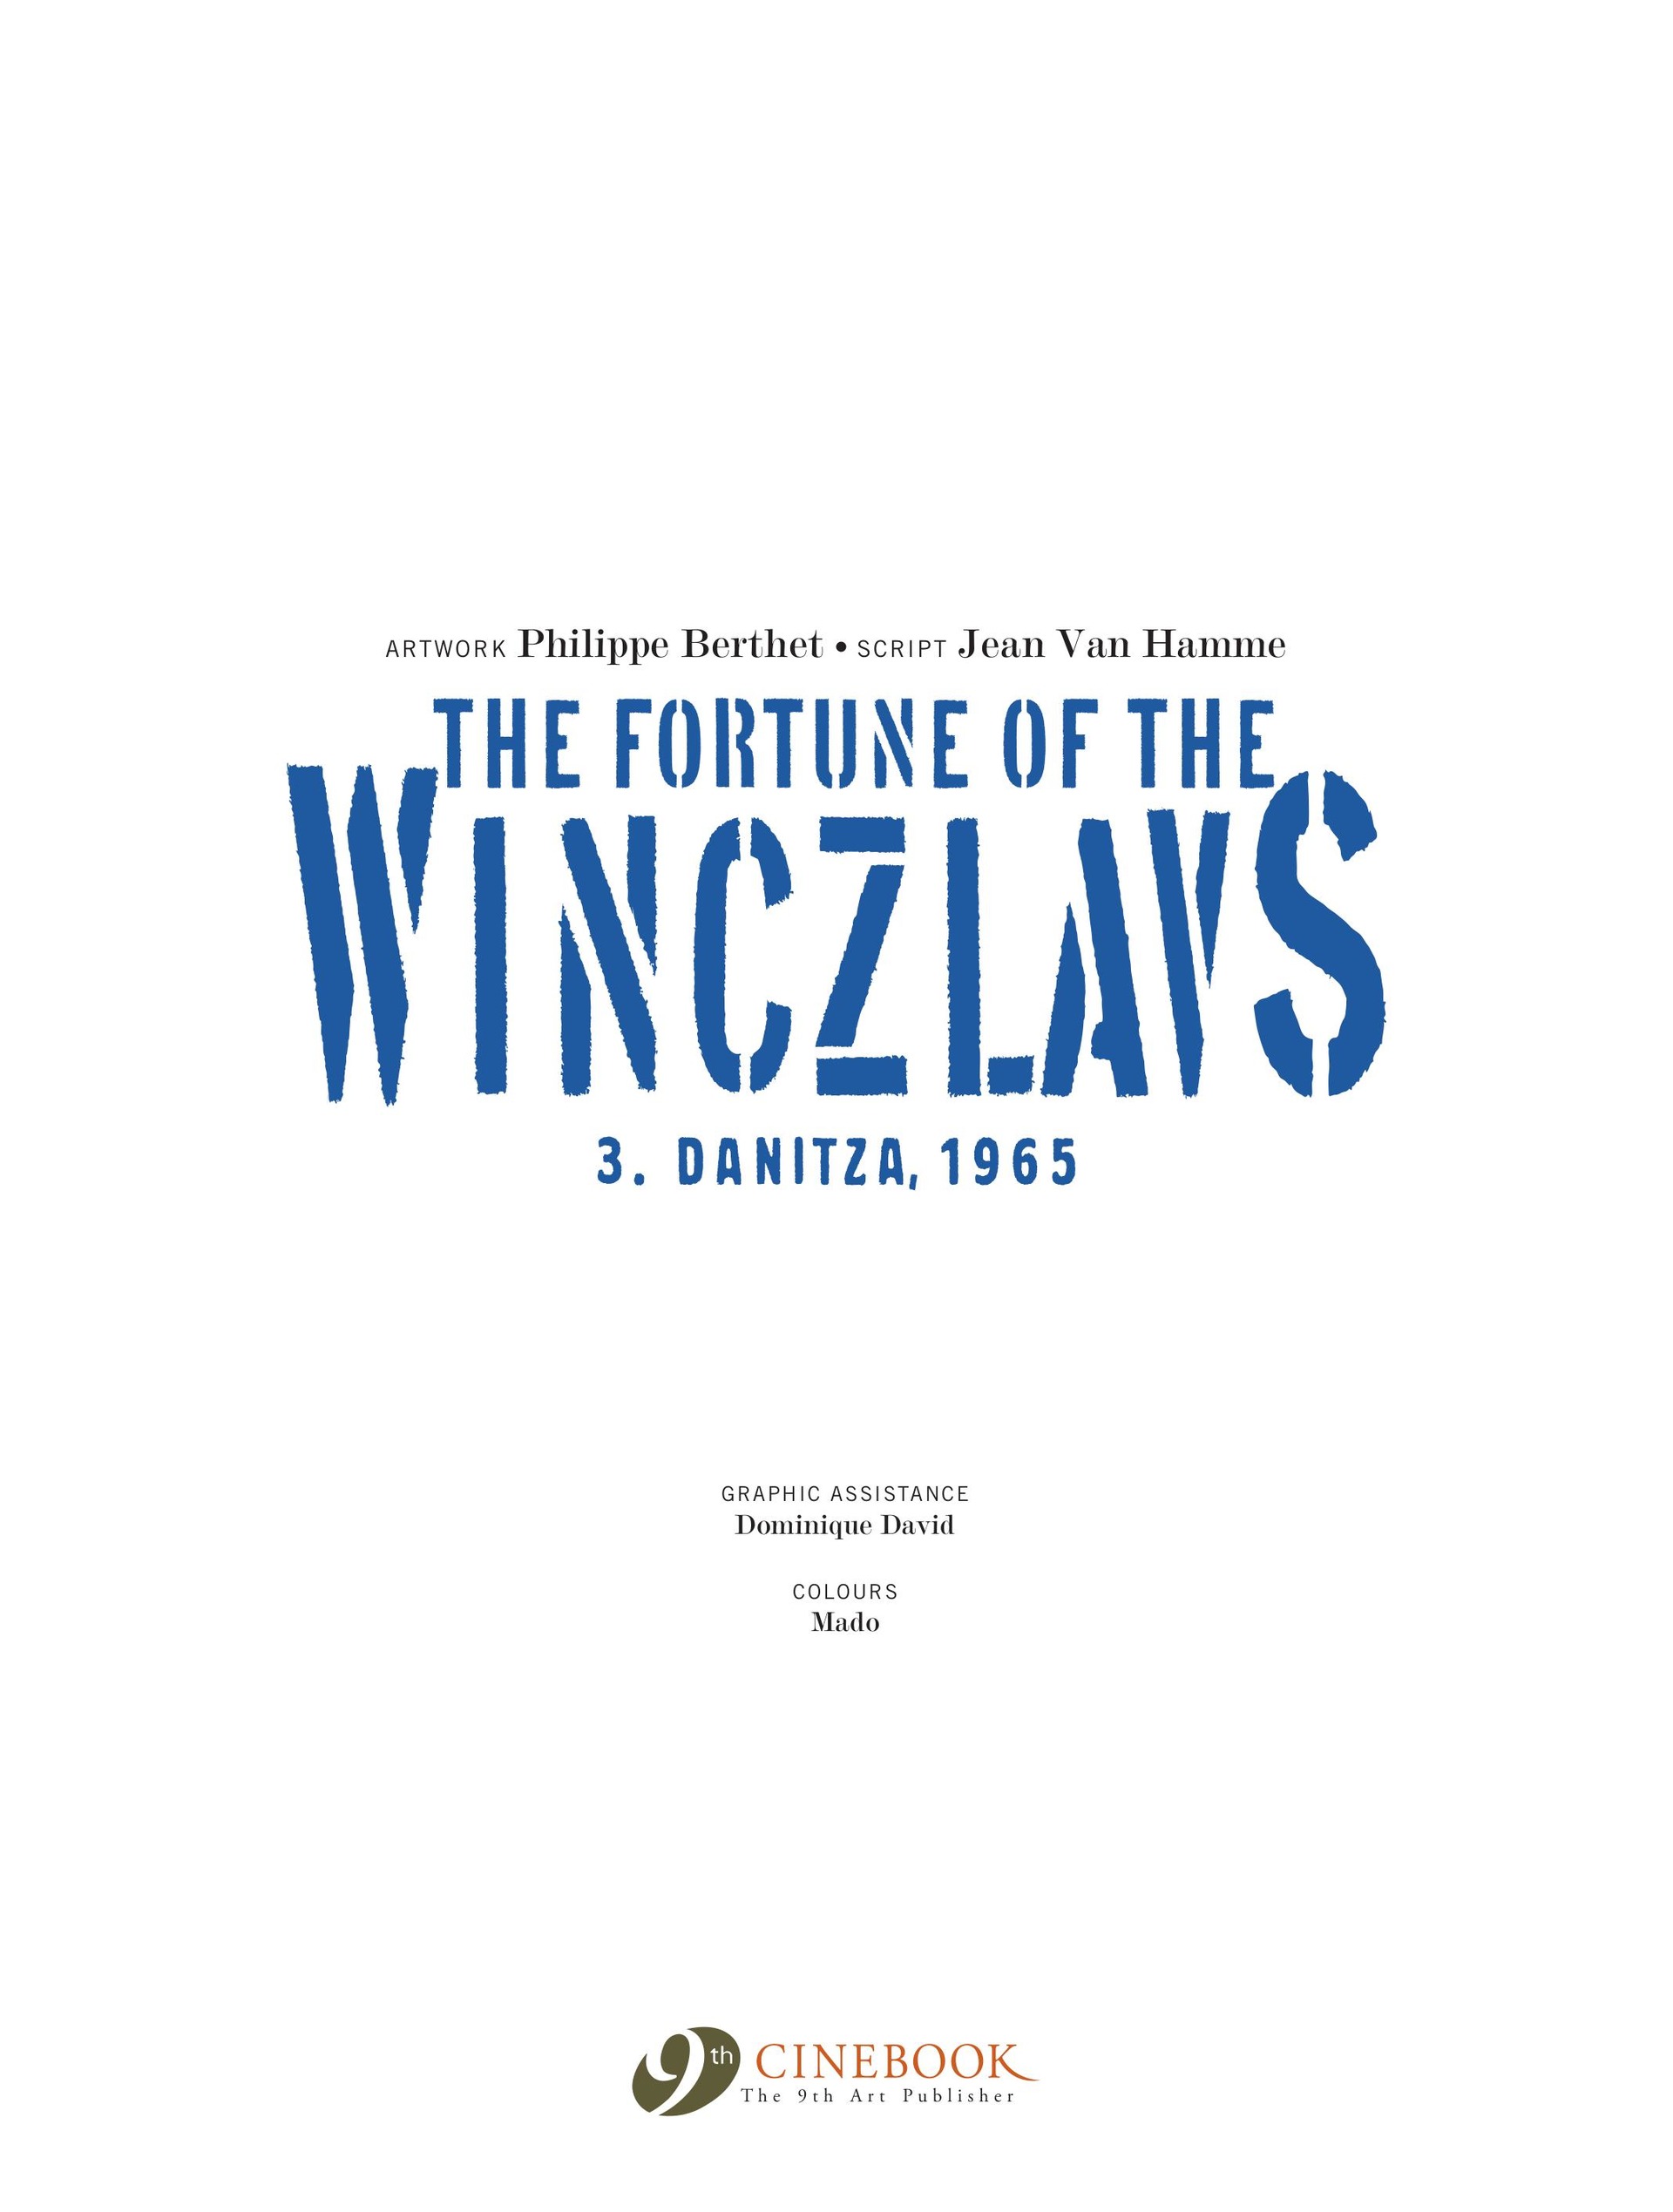 Read online The Fortune of the Winczlavs comic -  Issue #3 - 3